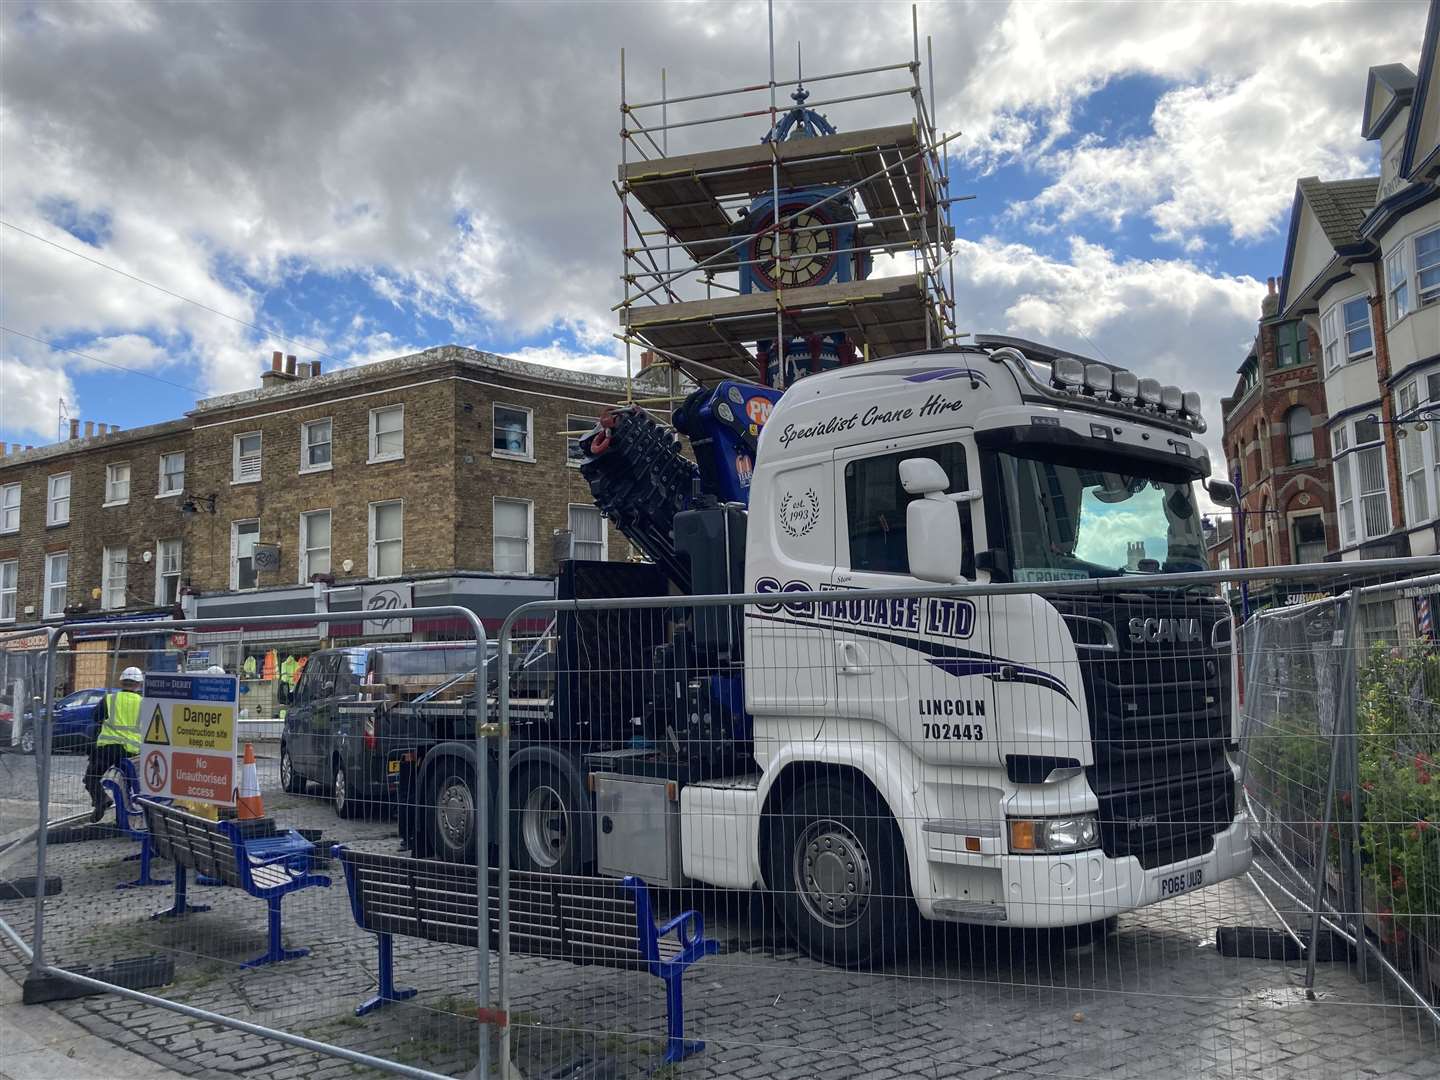 Scaffolding surrounds Sheerness clock tower as engineers prepare to dismantle it so it can be fully restored by Smith of Derby. It won't be back until the spring